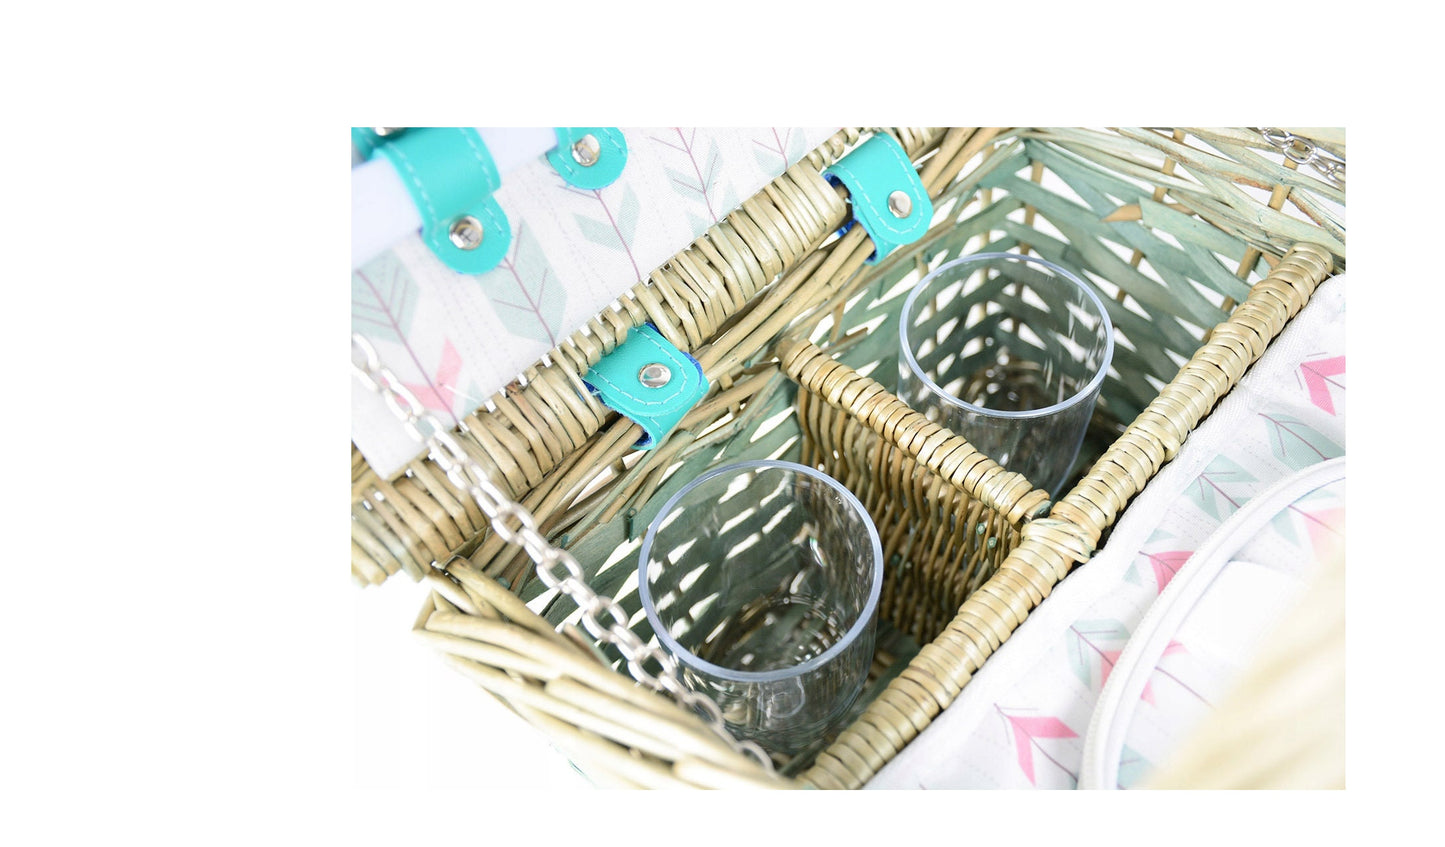 Wicker Picnic Basket Sets for 2 Persons with Cutlery Glass Set | Personalization Basket for Family, Party, Outdoor, Camping,  Couples Gifts